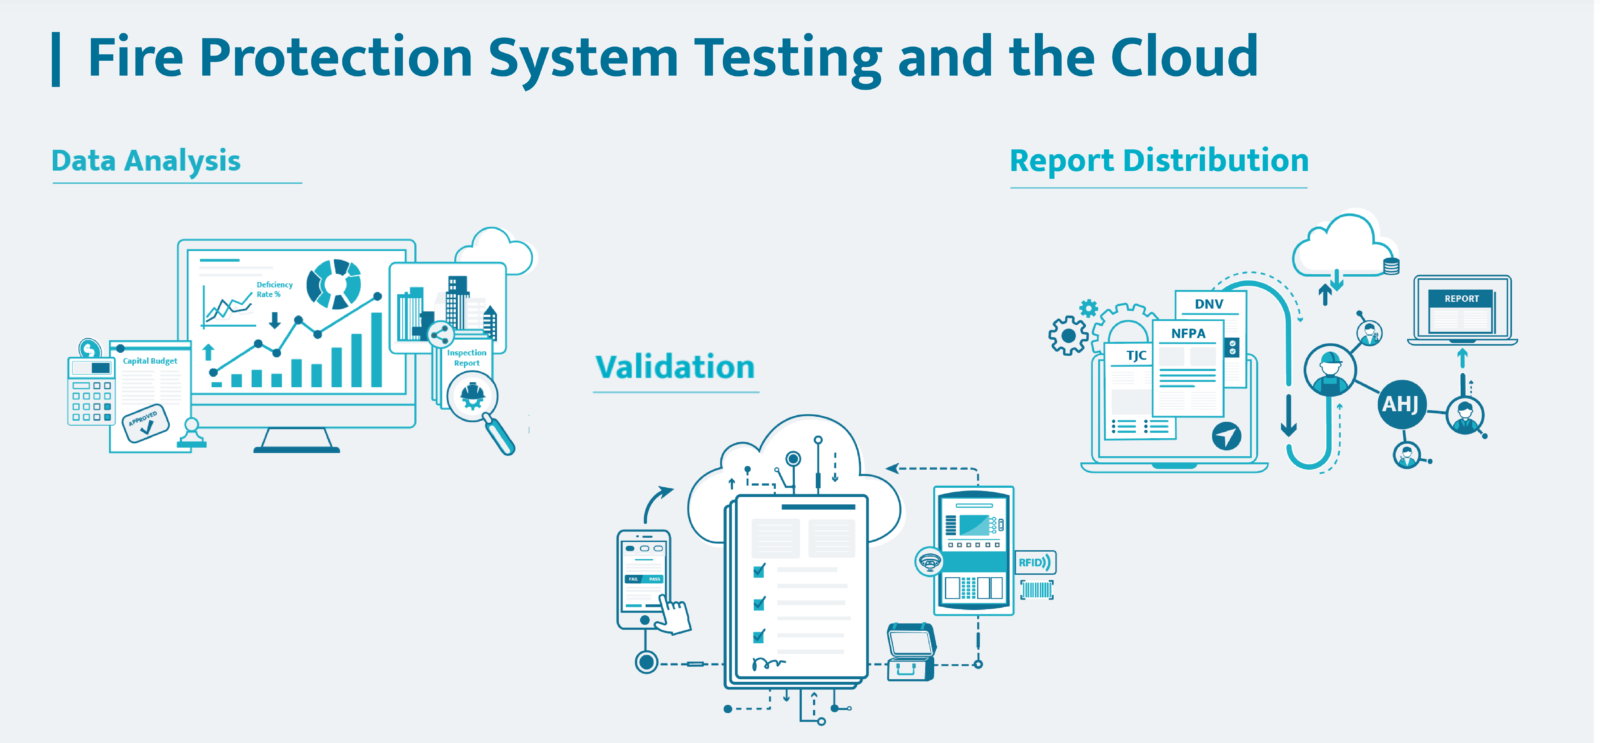 Fire Protection System Testing and the Cloud illustrations